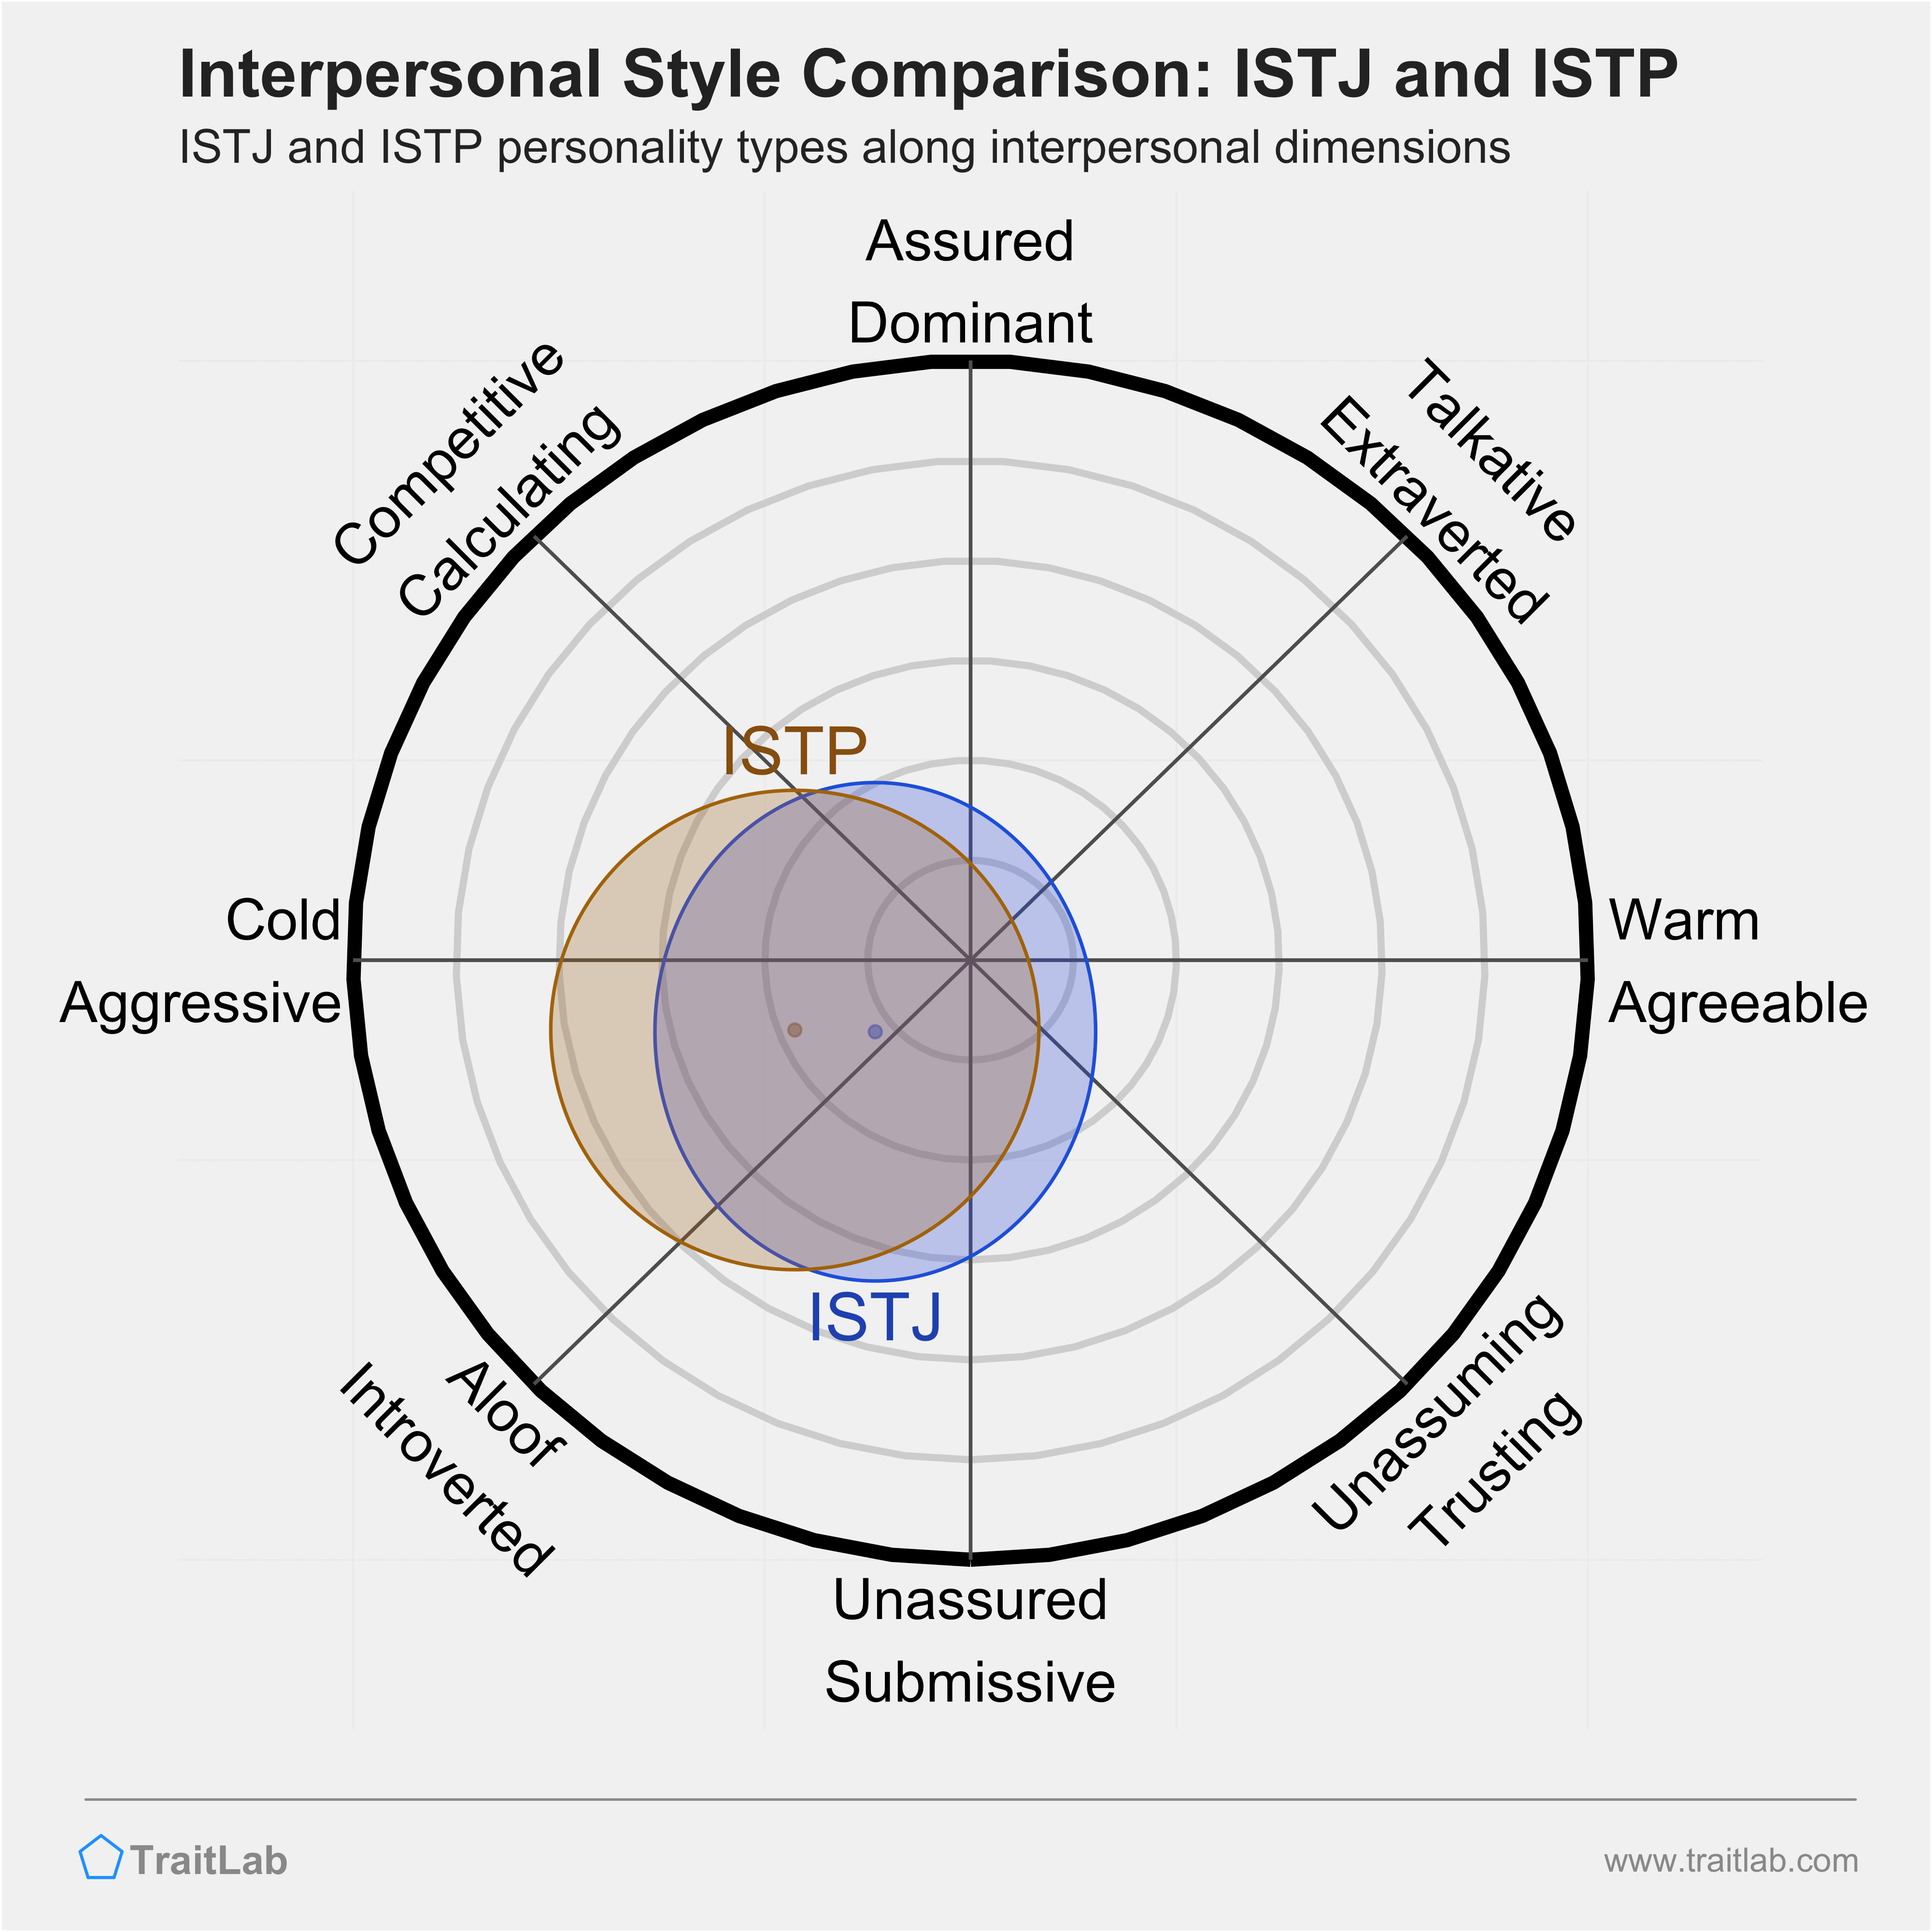 ISTJ and ISTP comparison across interpersonal dimensions